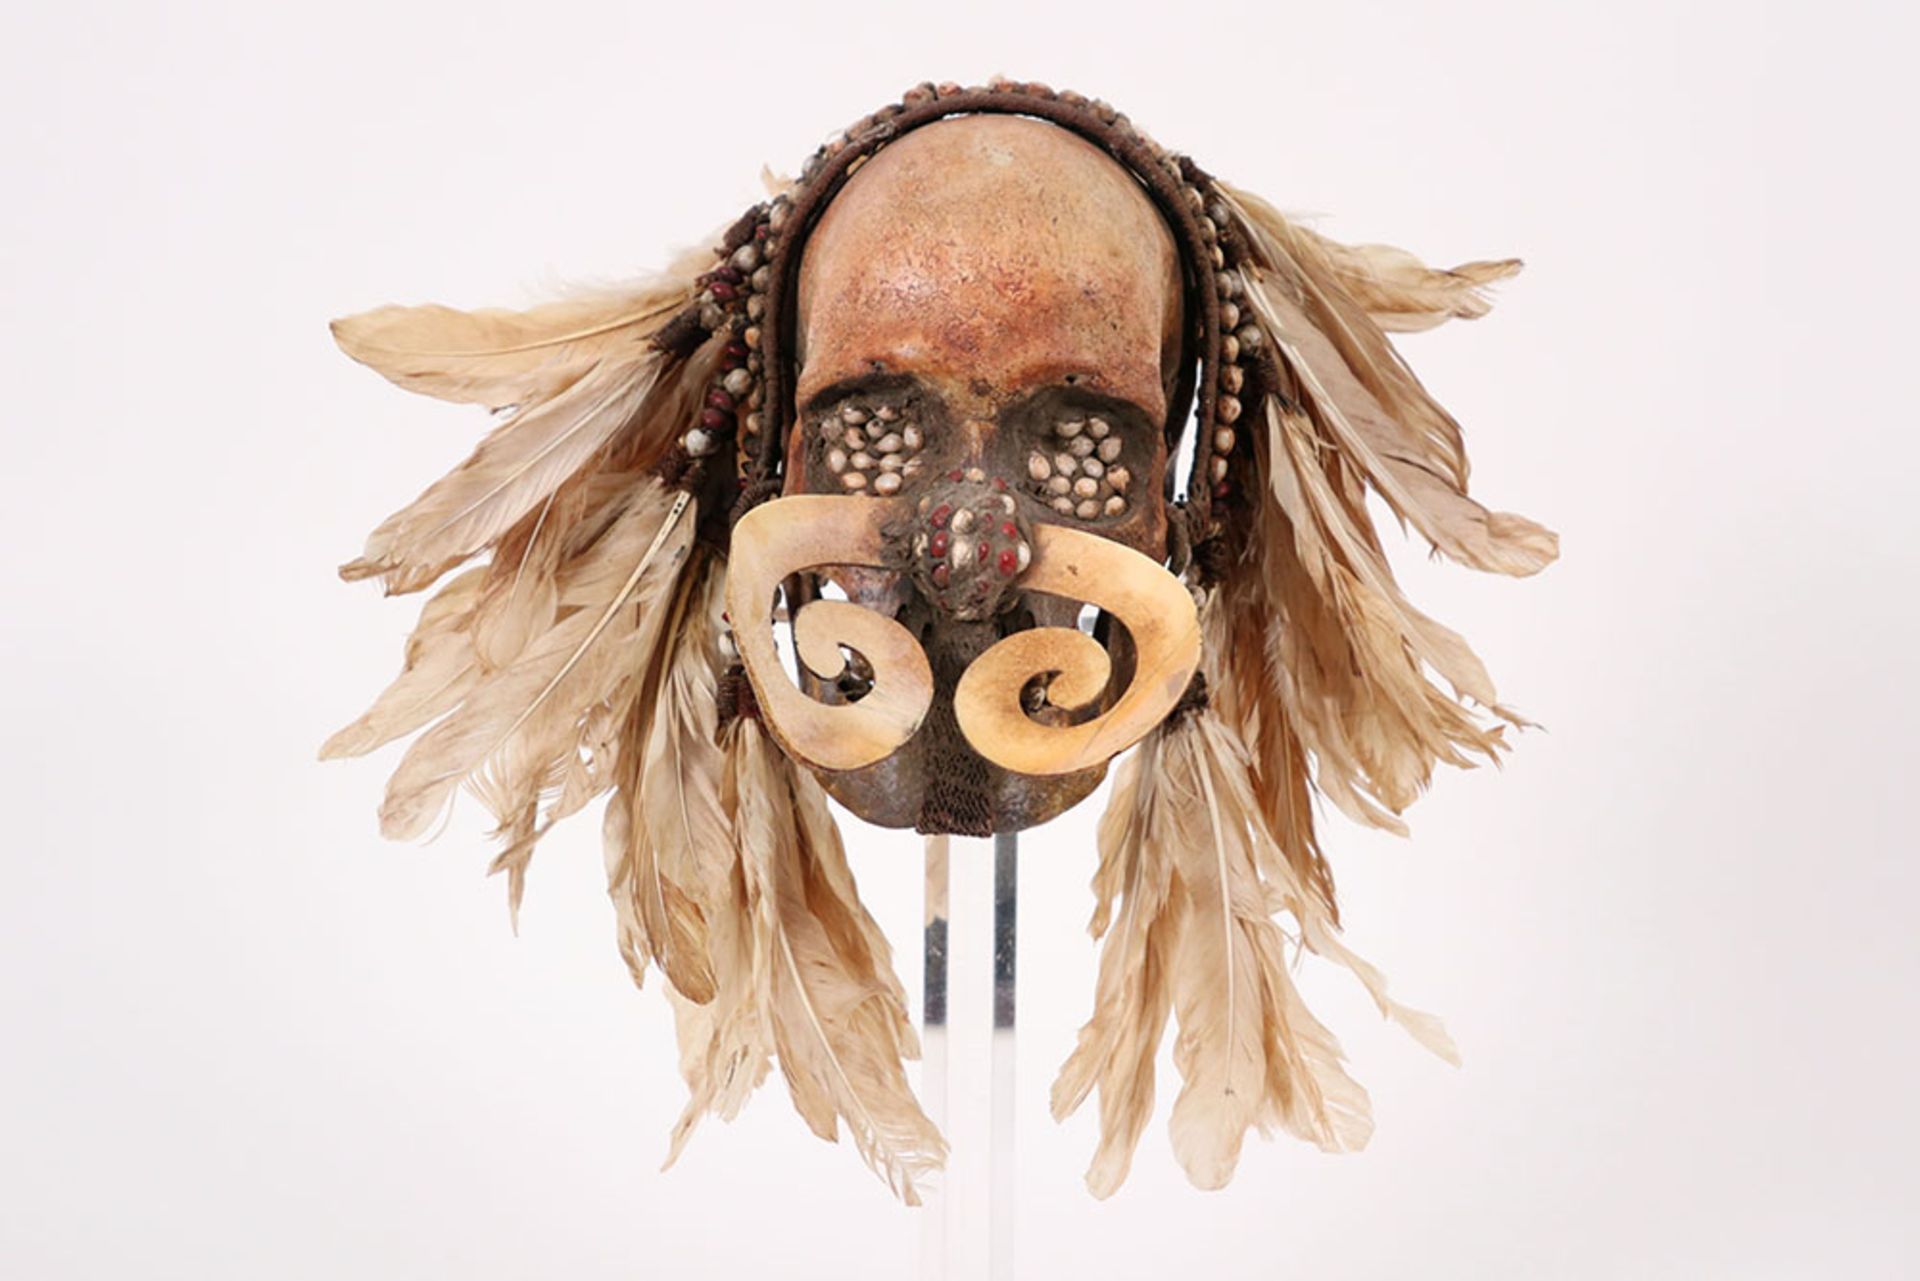 beautiful old Papua New Guinean "Asmat" sculpture with a skull with typical nose ornament, with